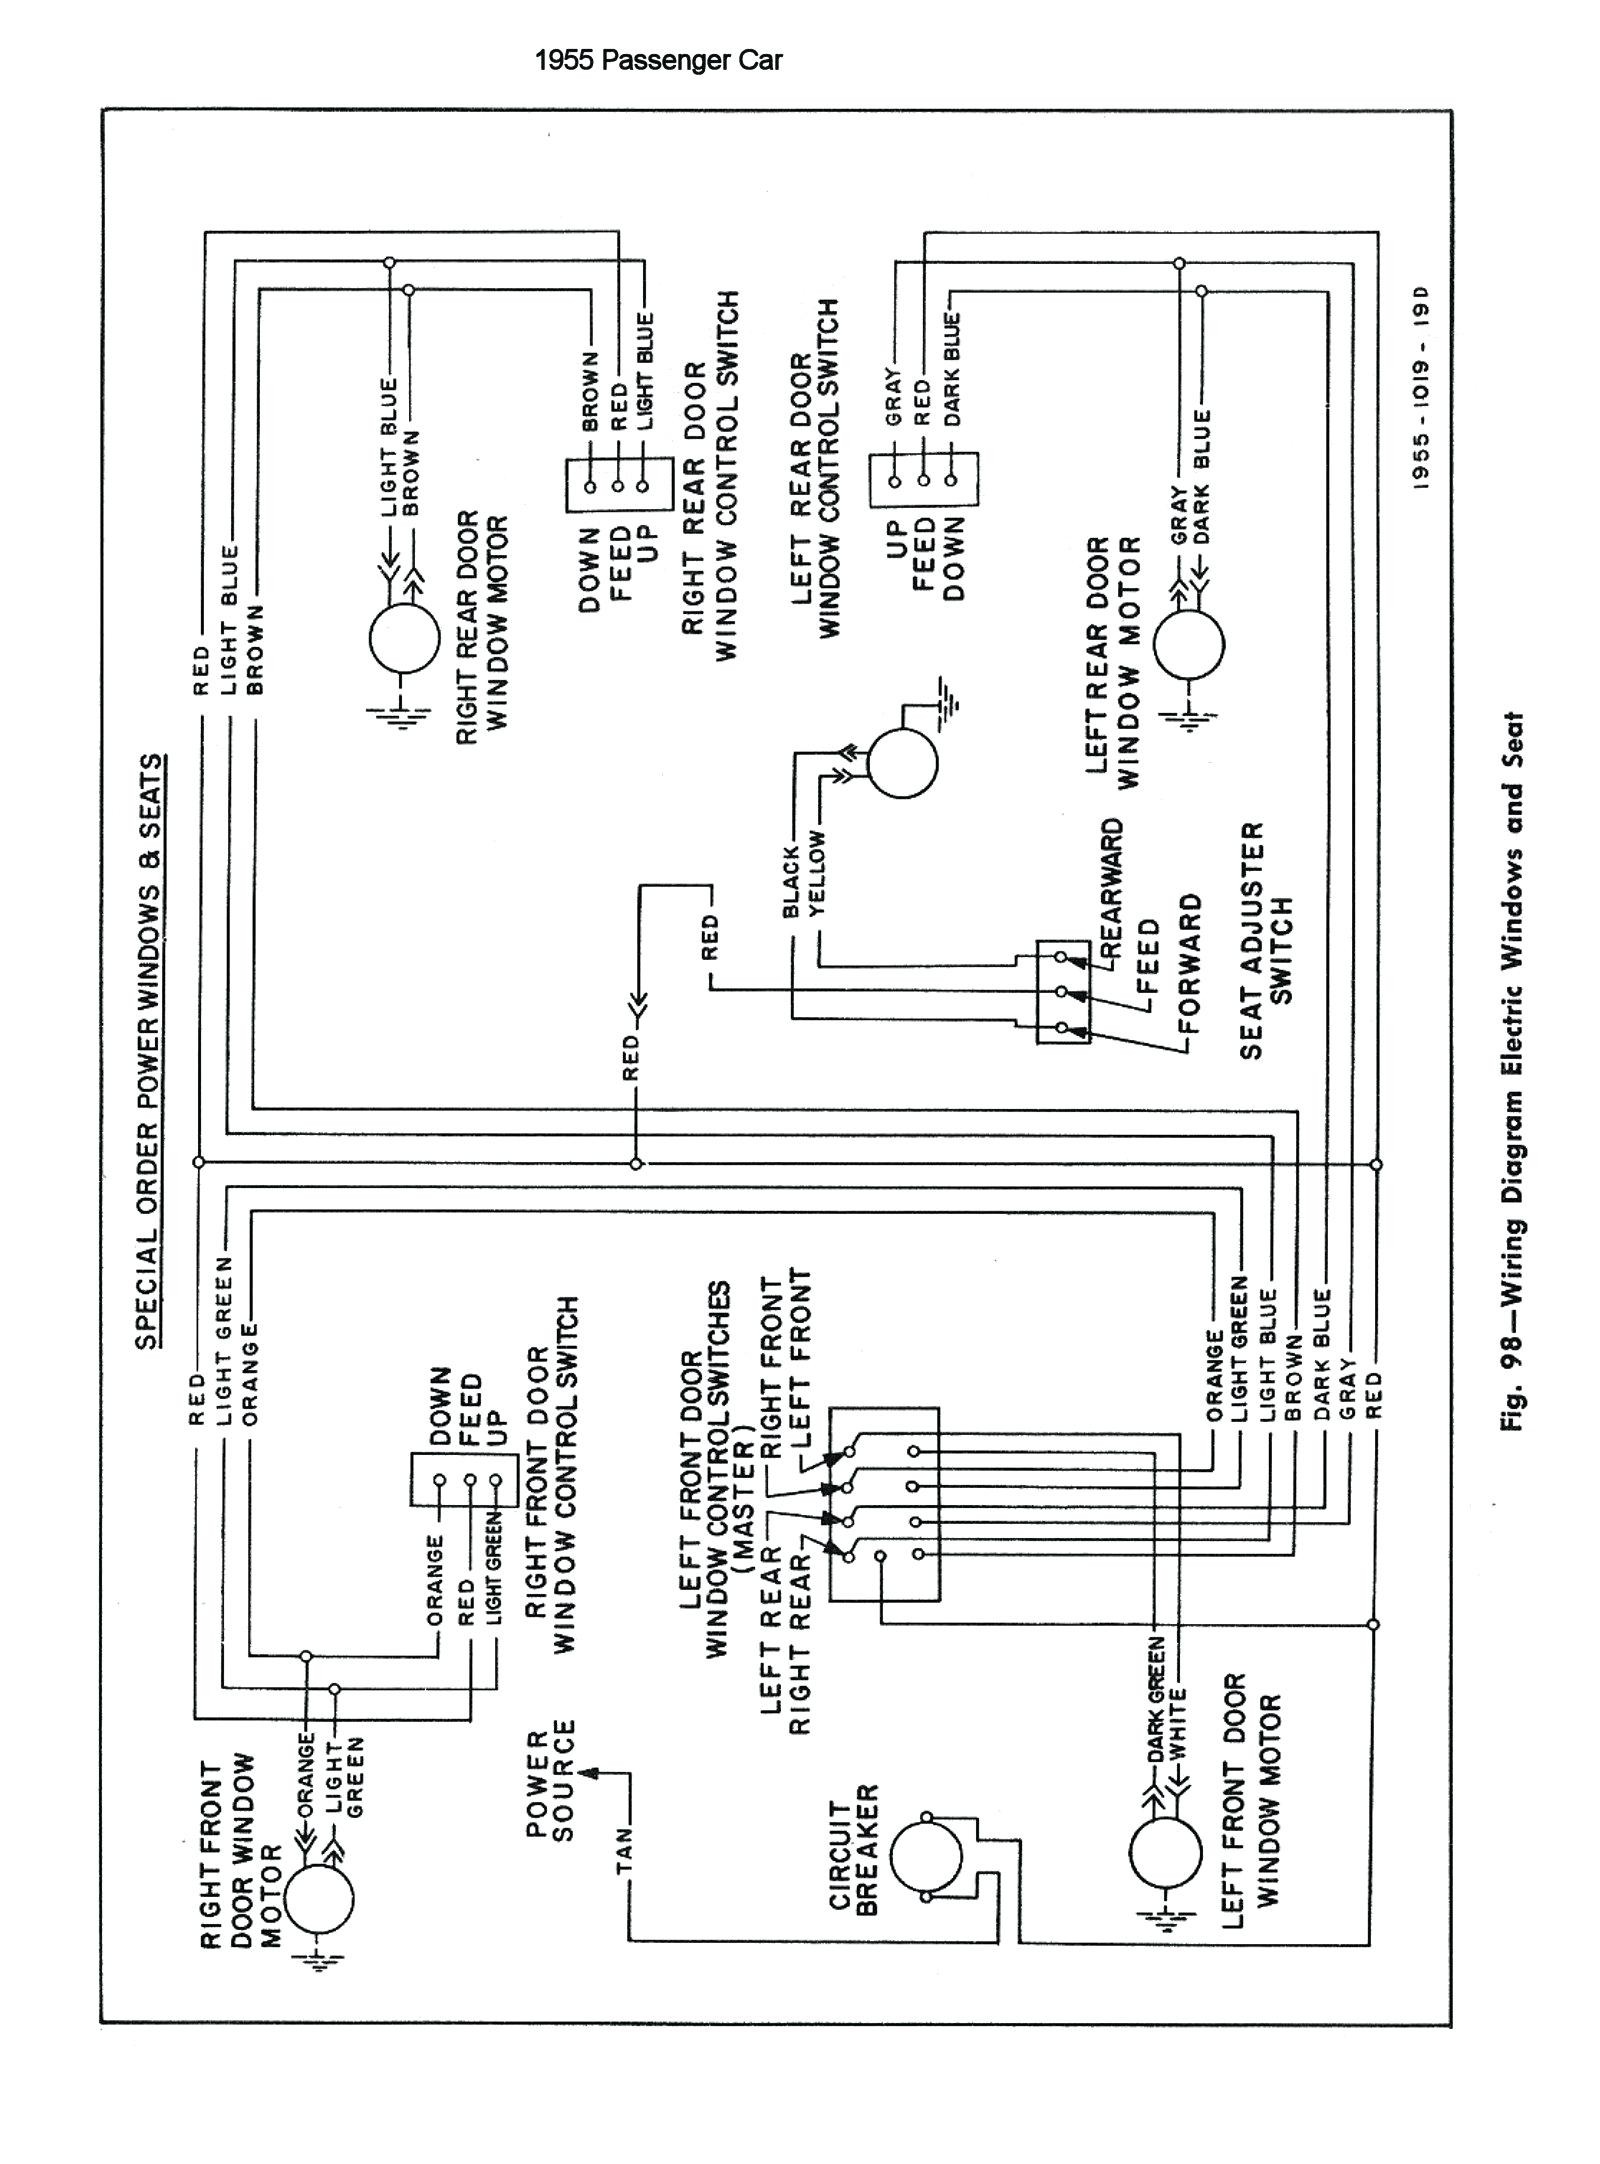 Universal Power Window Switch Wiring Diagram Electric Windows and Seats Wiring Diagram for 1955 Chevrolet Of Universal Power Window Switch Wiring Diagram